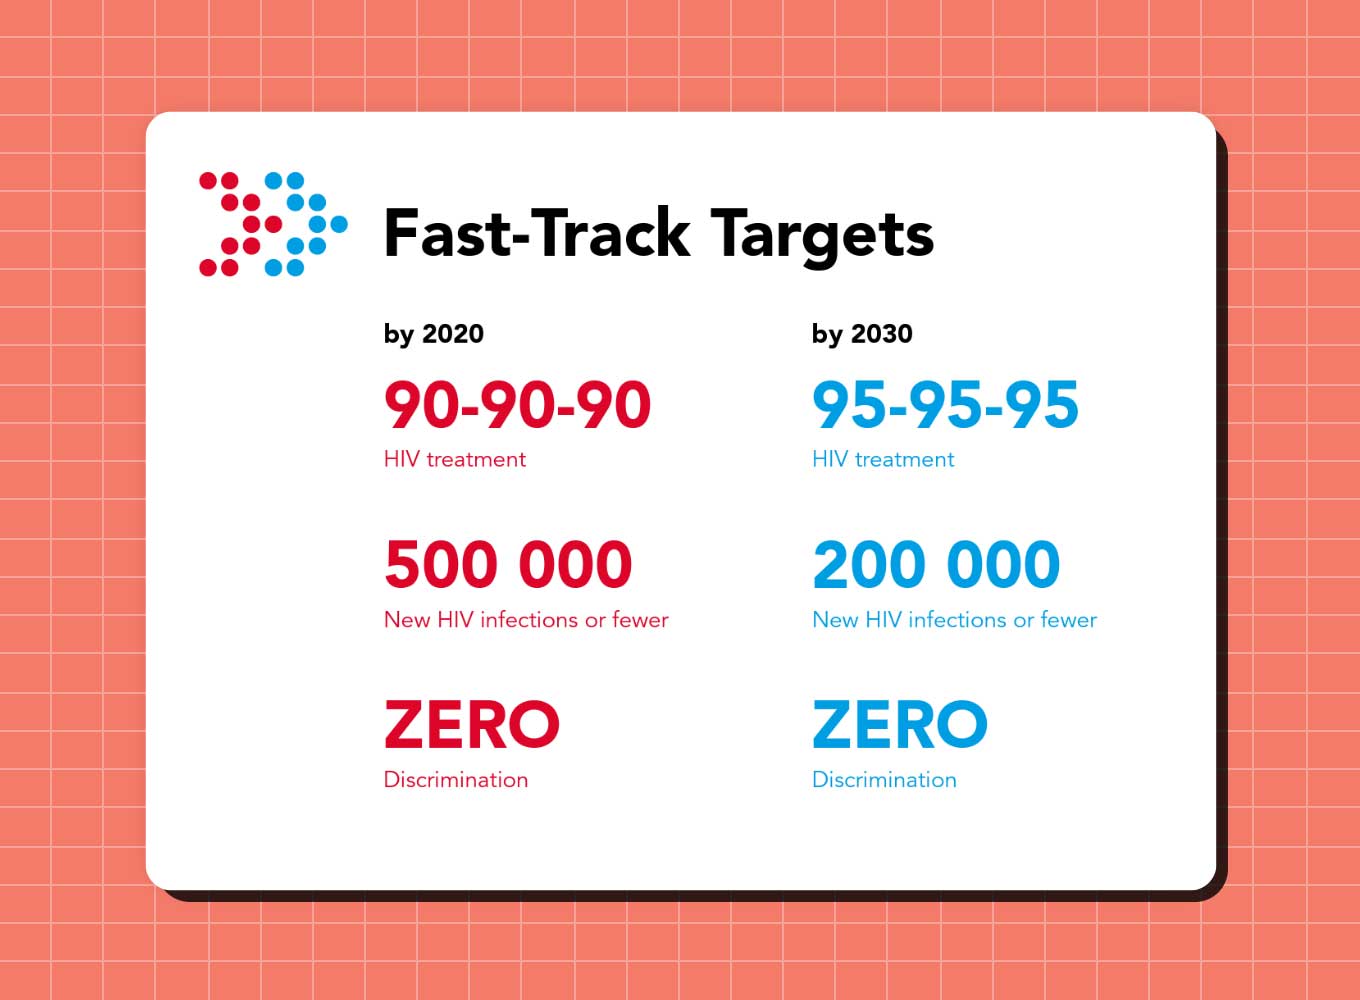 Fast-Track Targets: By 2020 - 90-90-90 HIV treatment, 500,000 new infections or fewer, zero discrimination. By 2030: 95-95-95 HIV treatment, 200,000 new HIV infections or fewer, zero discrimination